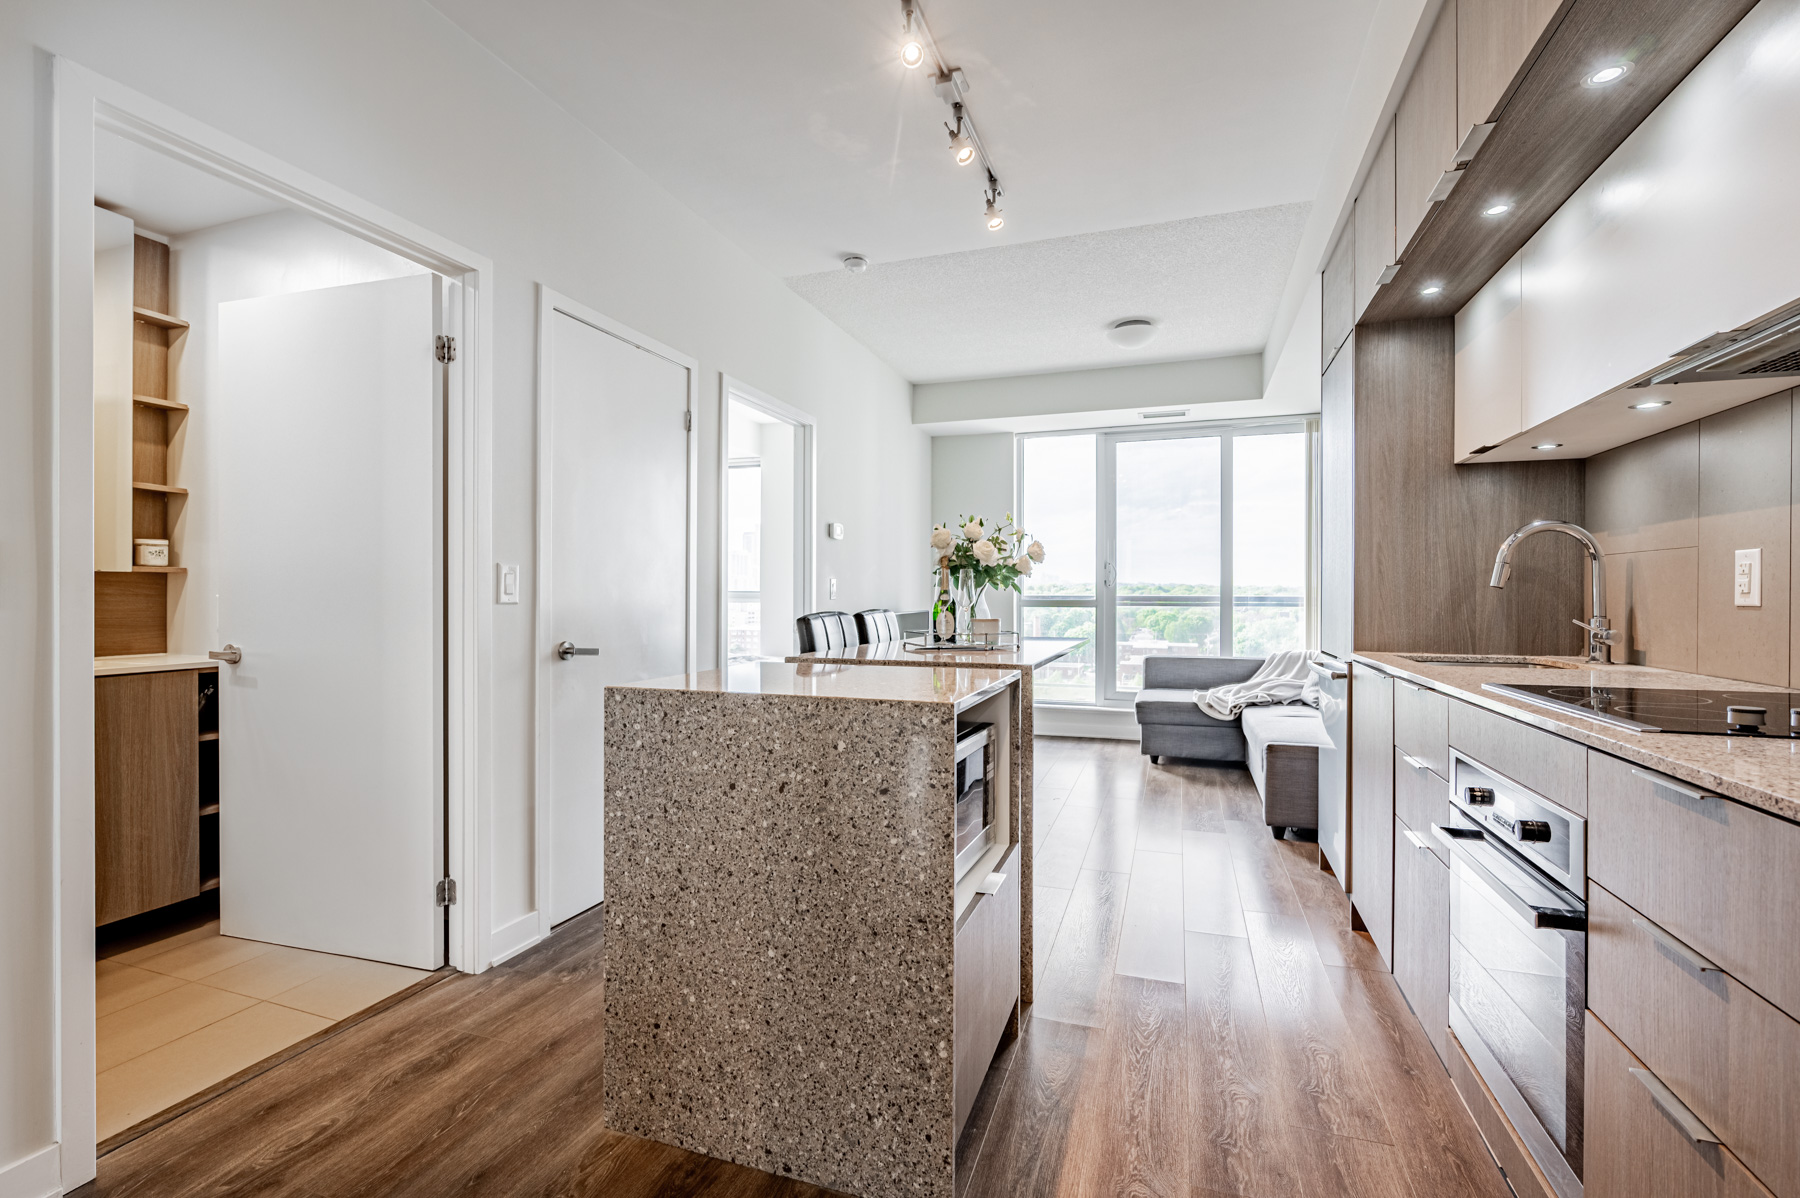 55 Regent Park Blvd Unit 1210 linear layout and tons of natural light.